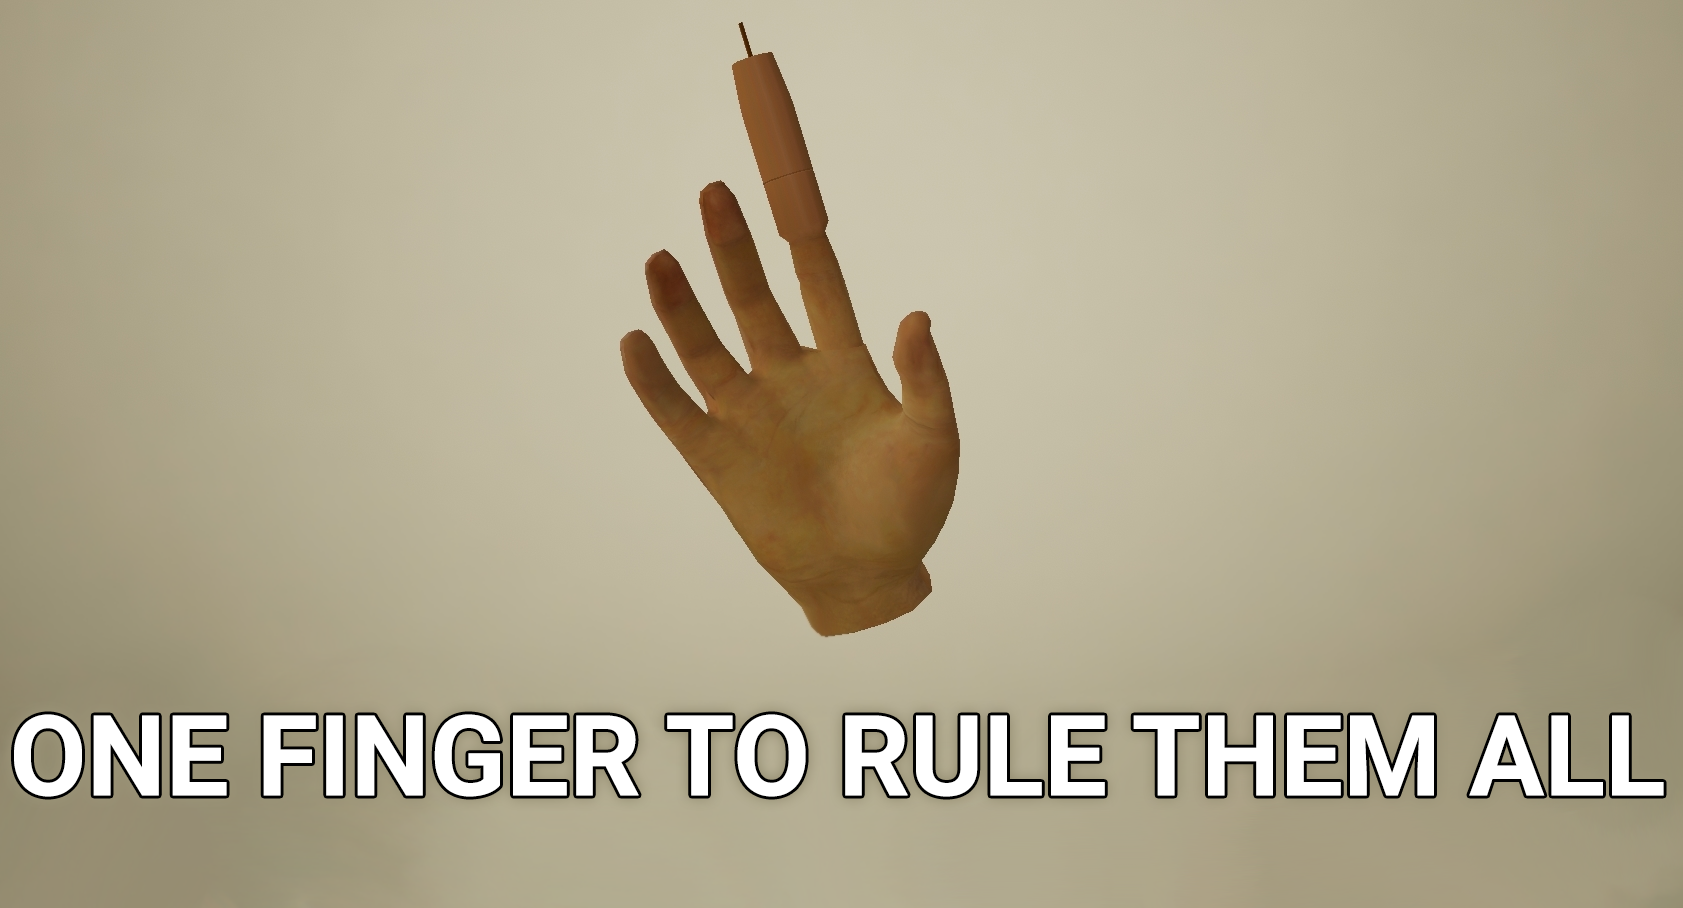 One finger to rule them all